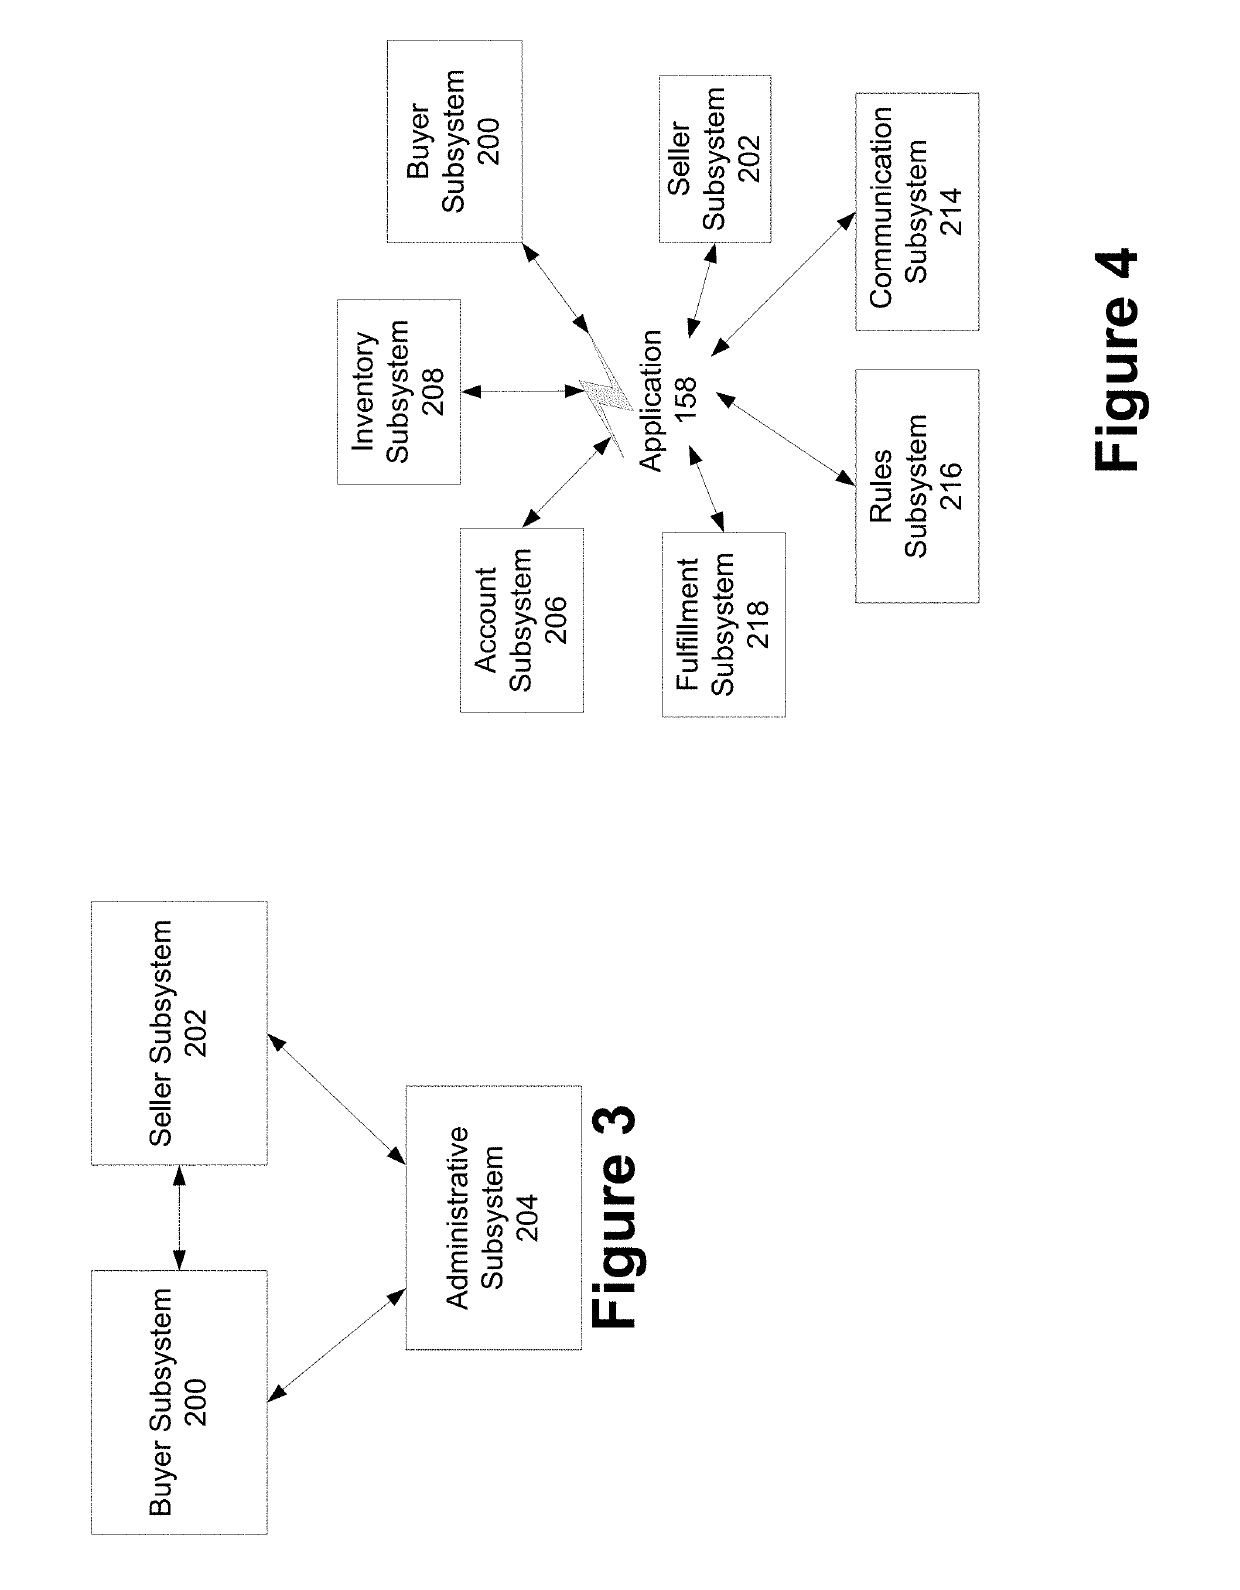 System and method for pharmaceutical transactions